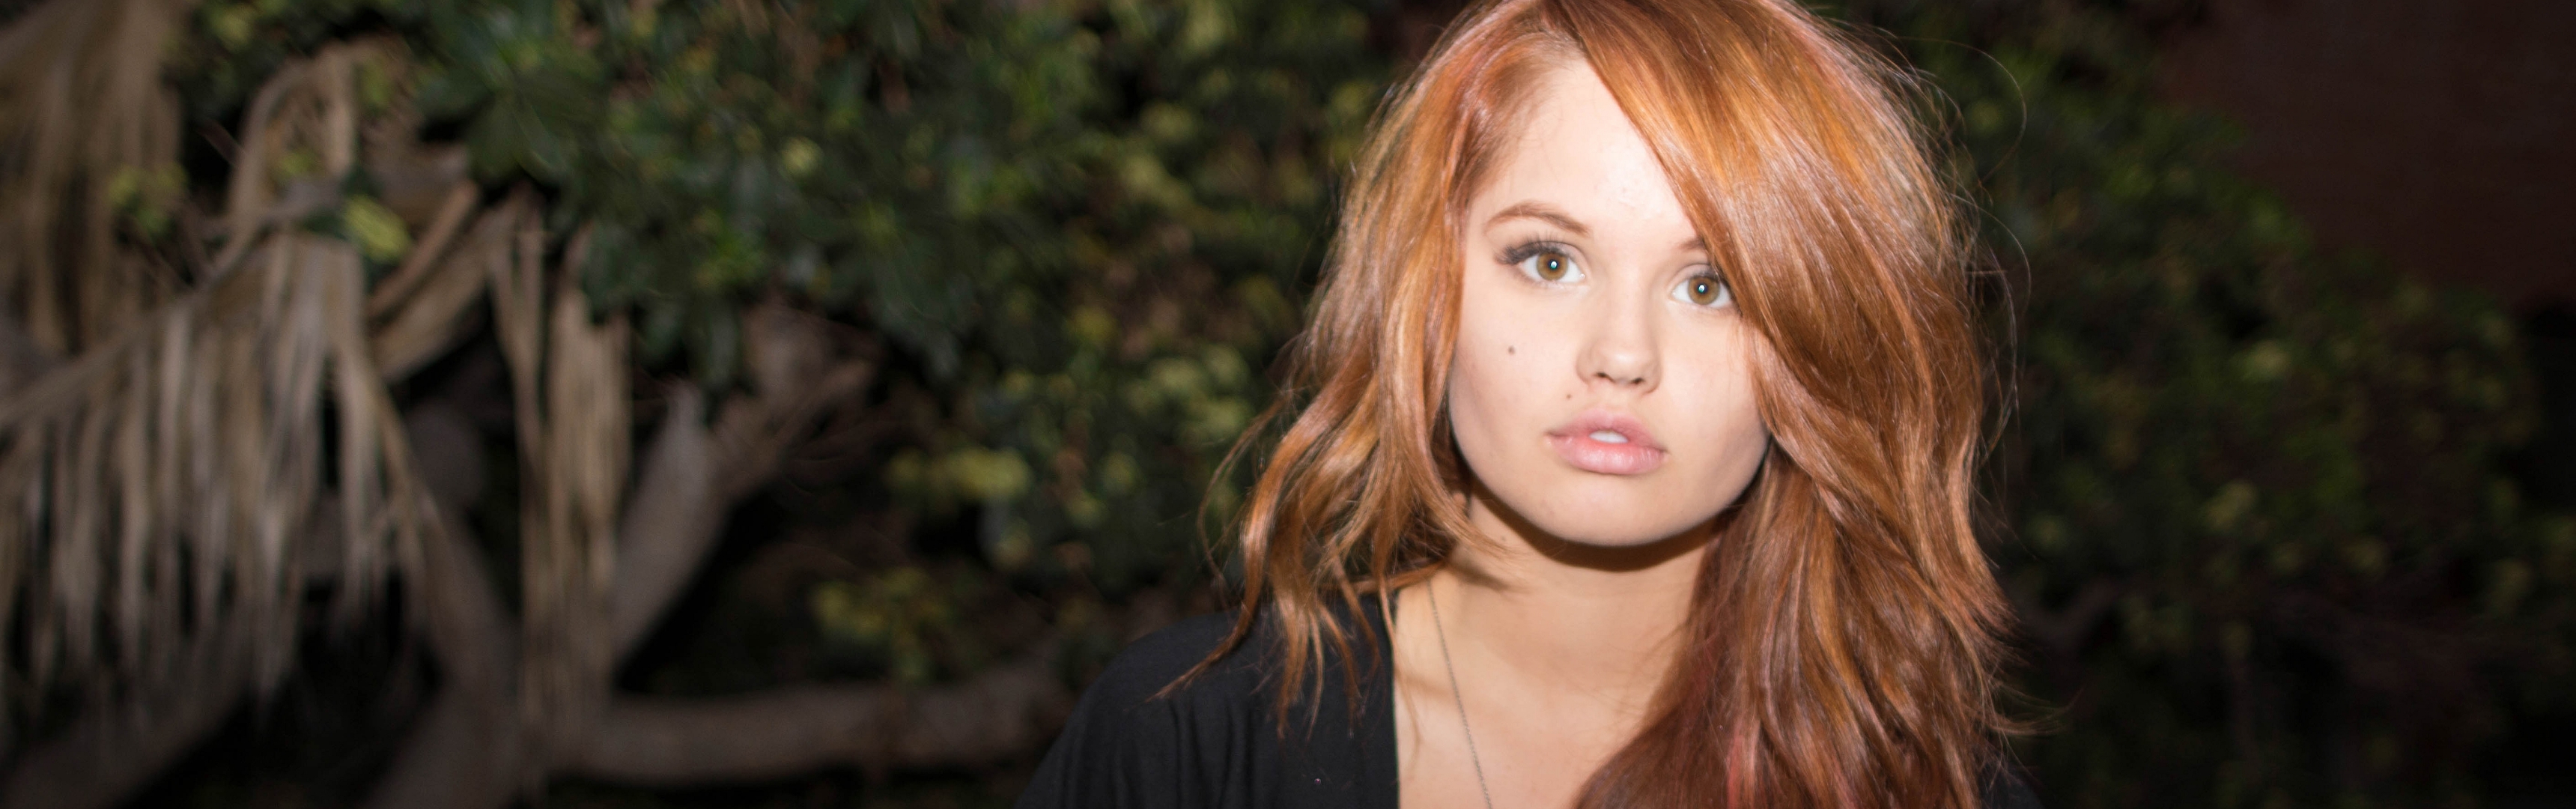 3440x1080 Debby Ryan Images 3440x1080 Resolution Wallpaper Hd Celebrities 4k Wallpapers Images 